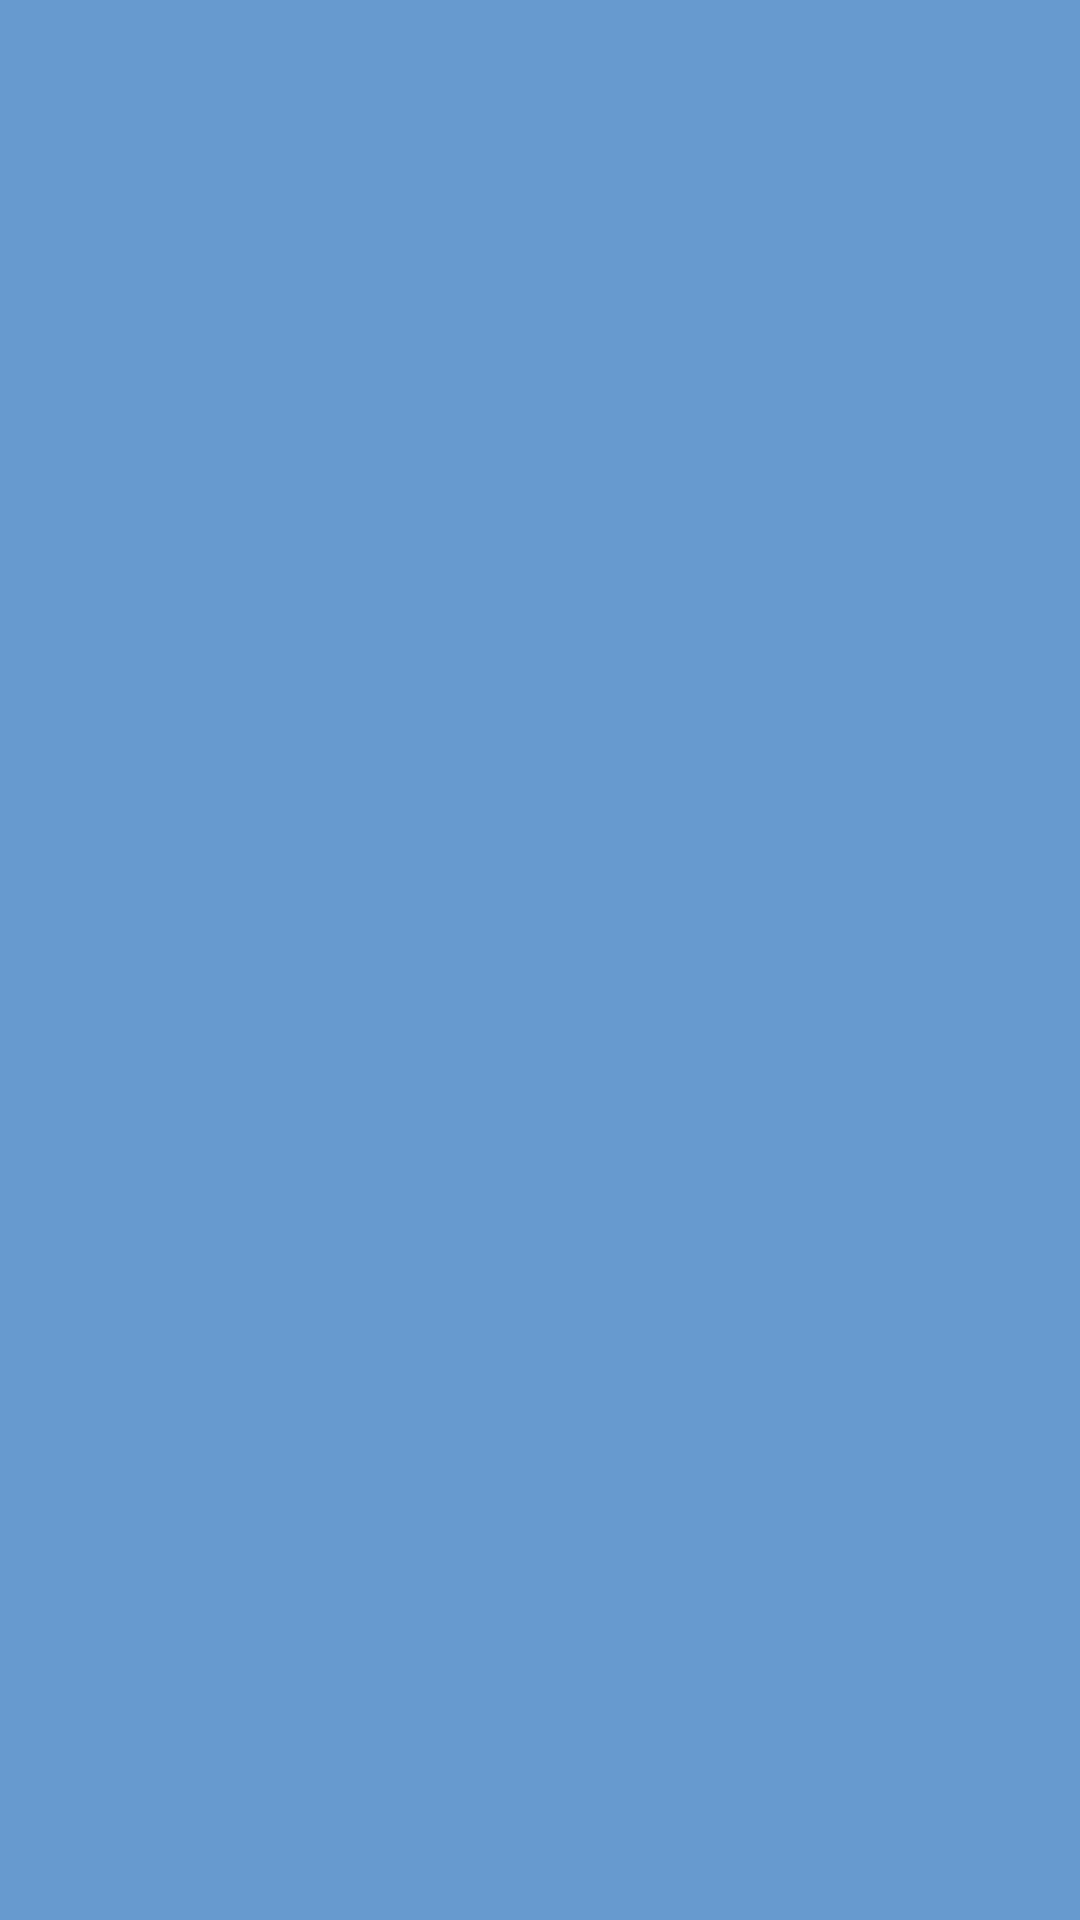 1080x1920 Blue-gray Solid Color Background